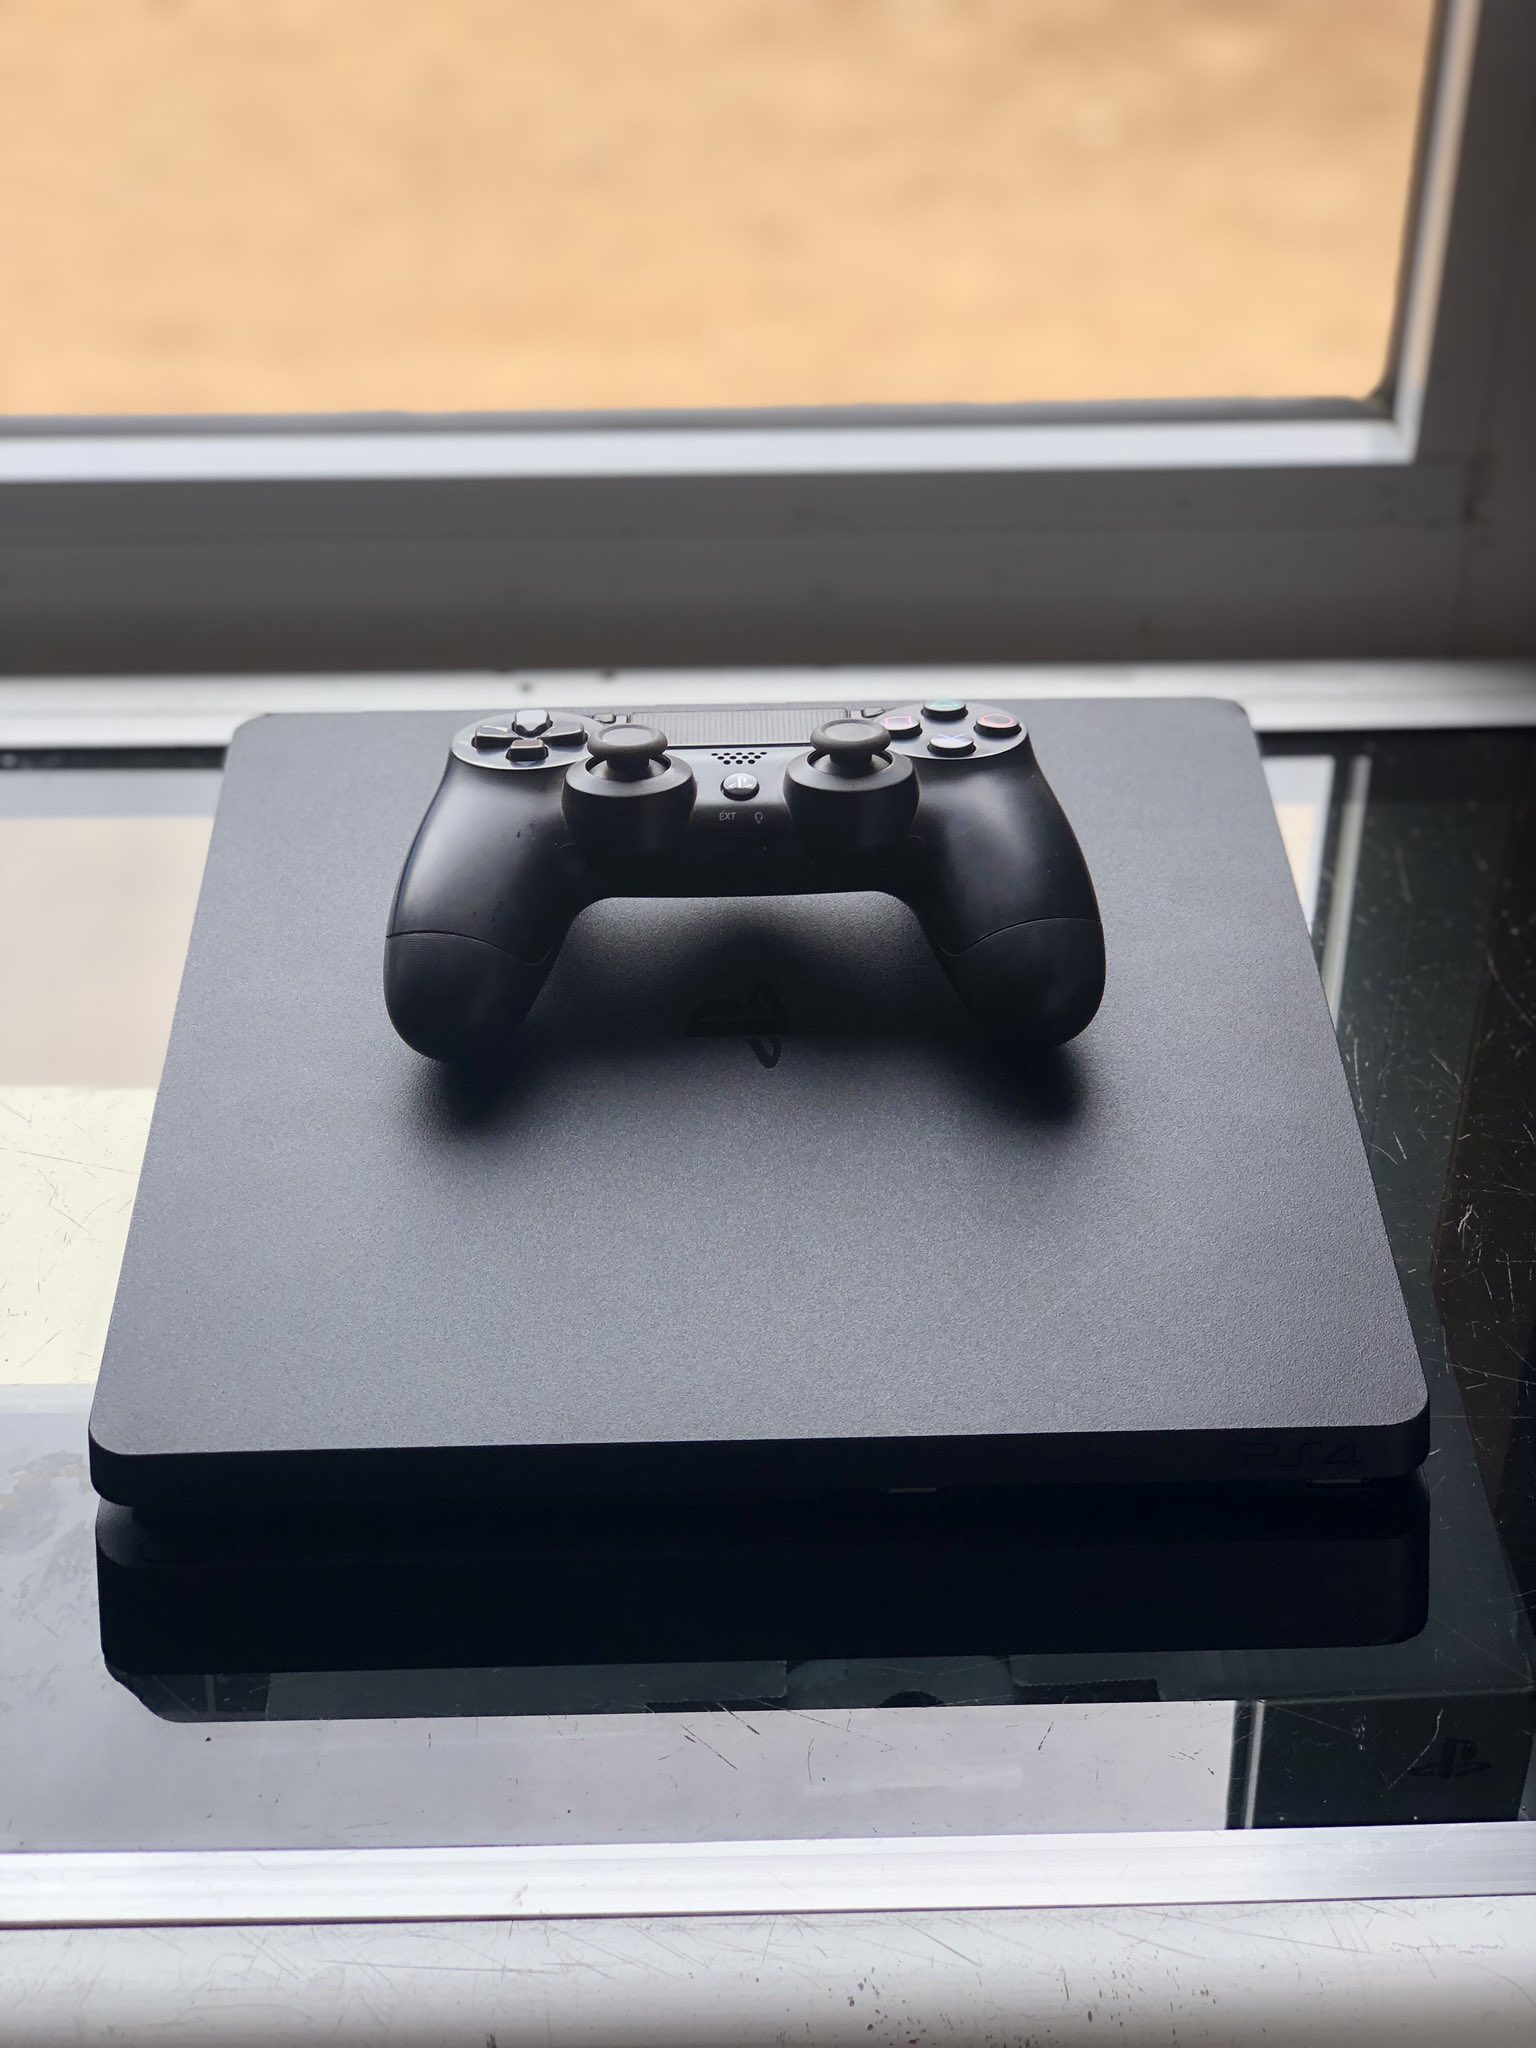 MCITY Ghana on X: "PS4 Slim 1TB 1 Controller 12 games (check the 3rd  picture for the list of games) Price: 2,250 cedis https://t.co/3yVl7VfqtZ"  / X